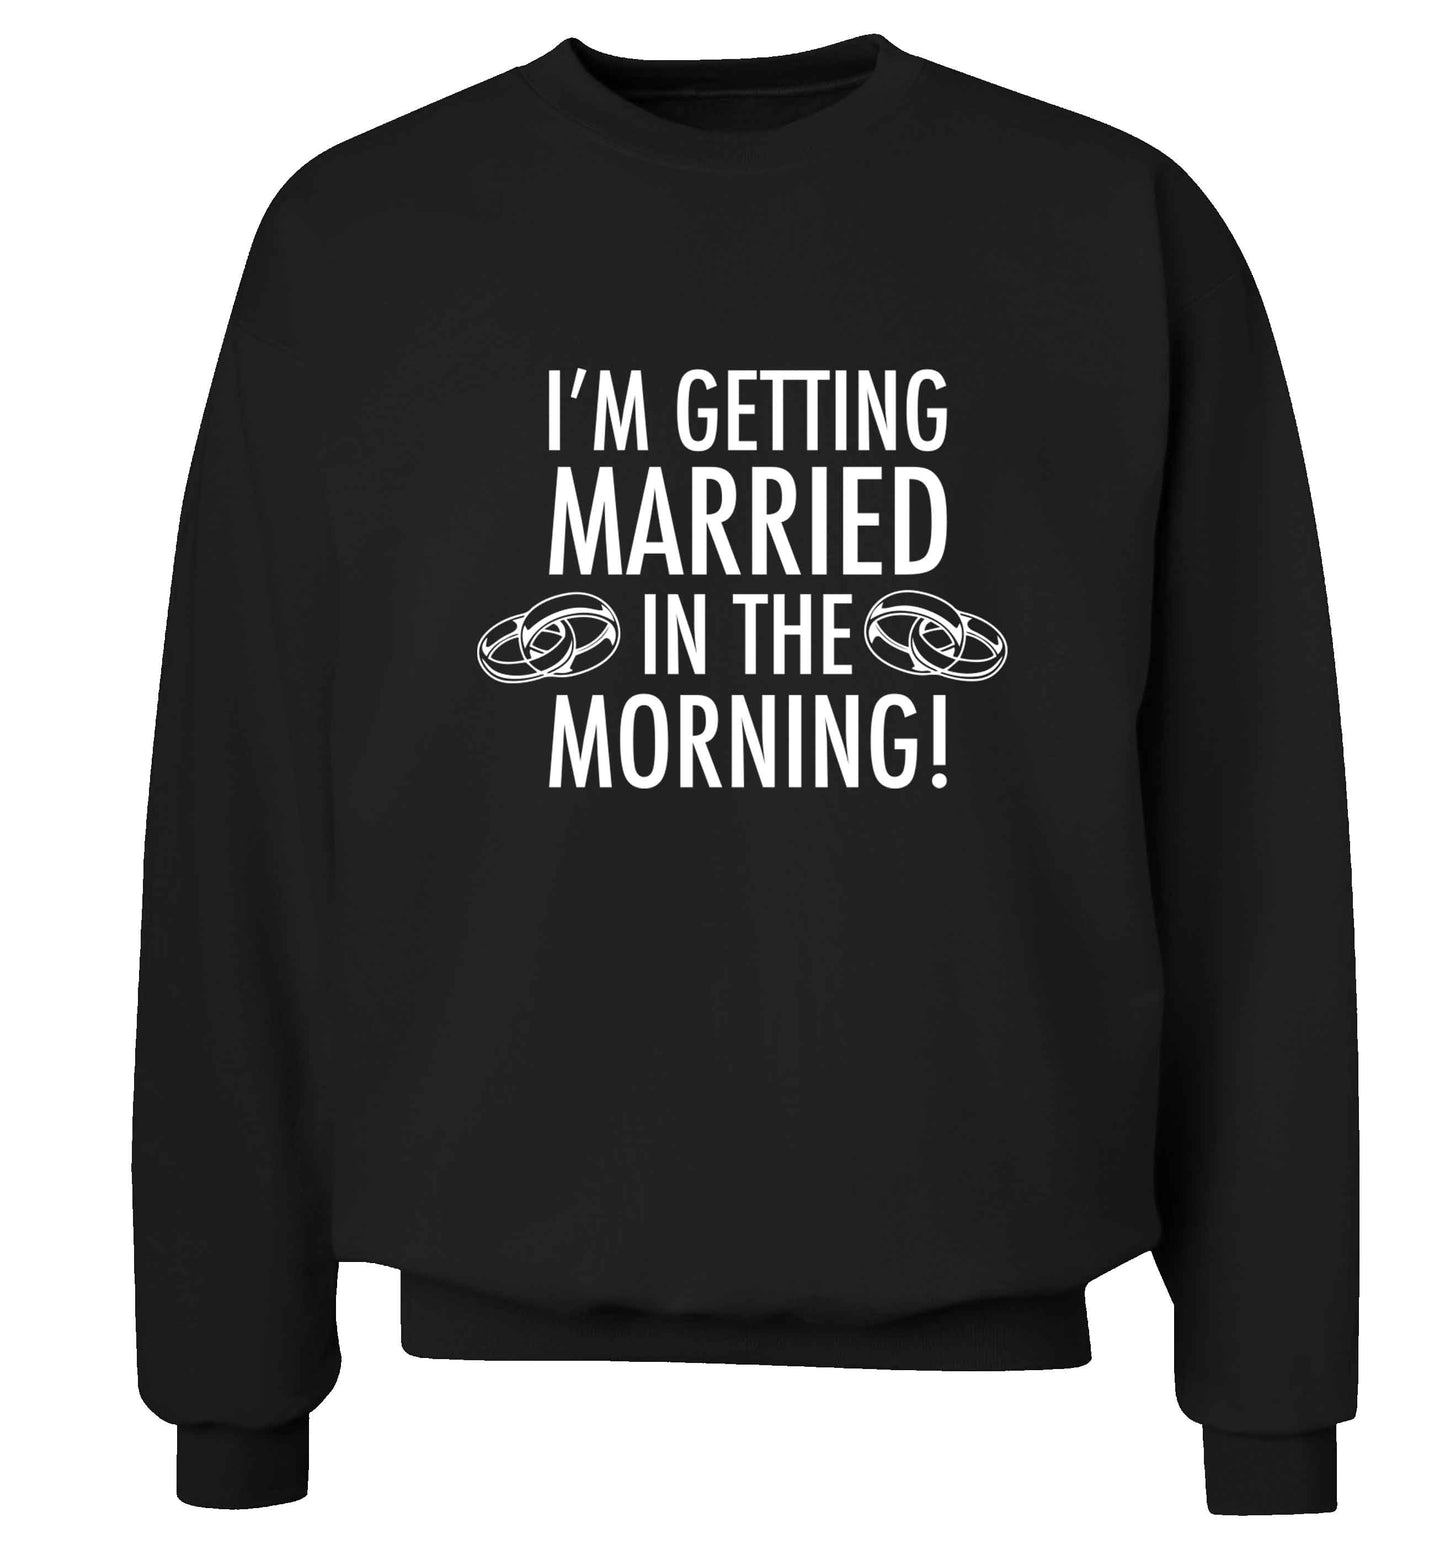 I'm getting married in the morning! adult's unisex black sweater 2XL